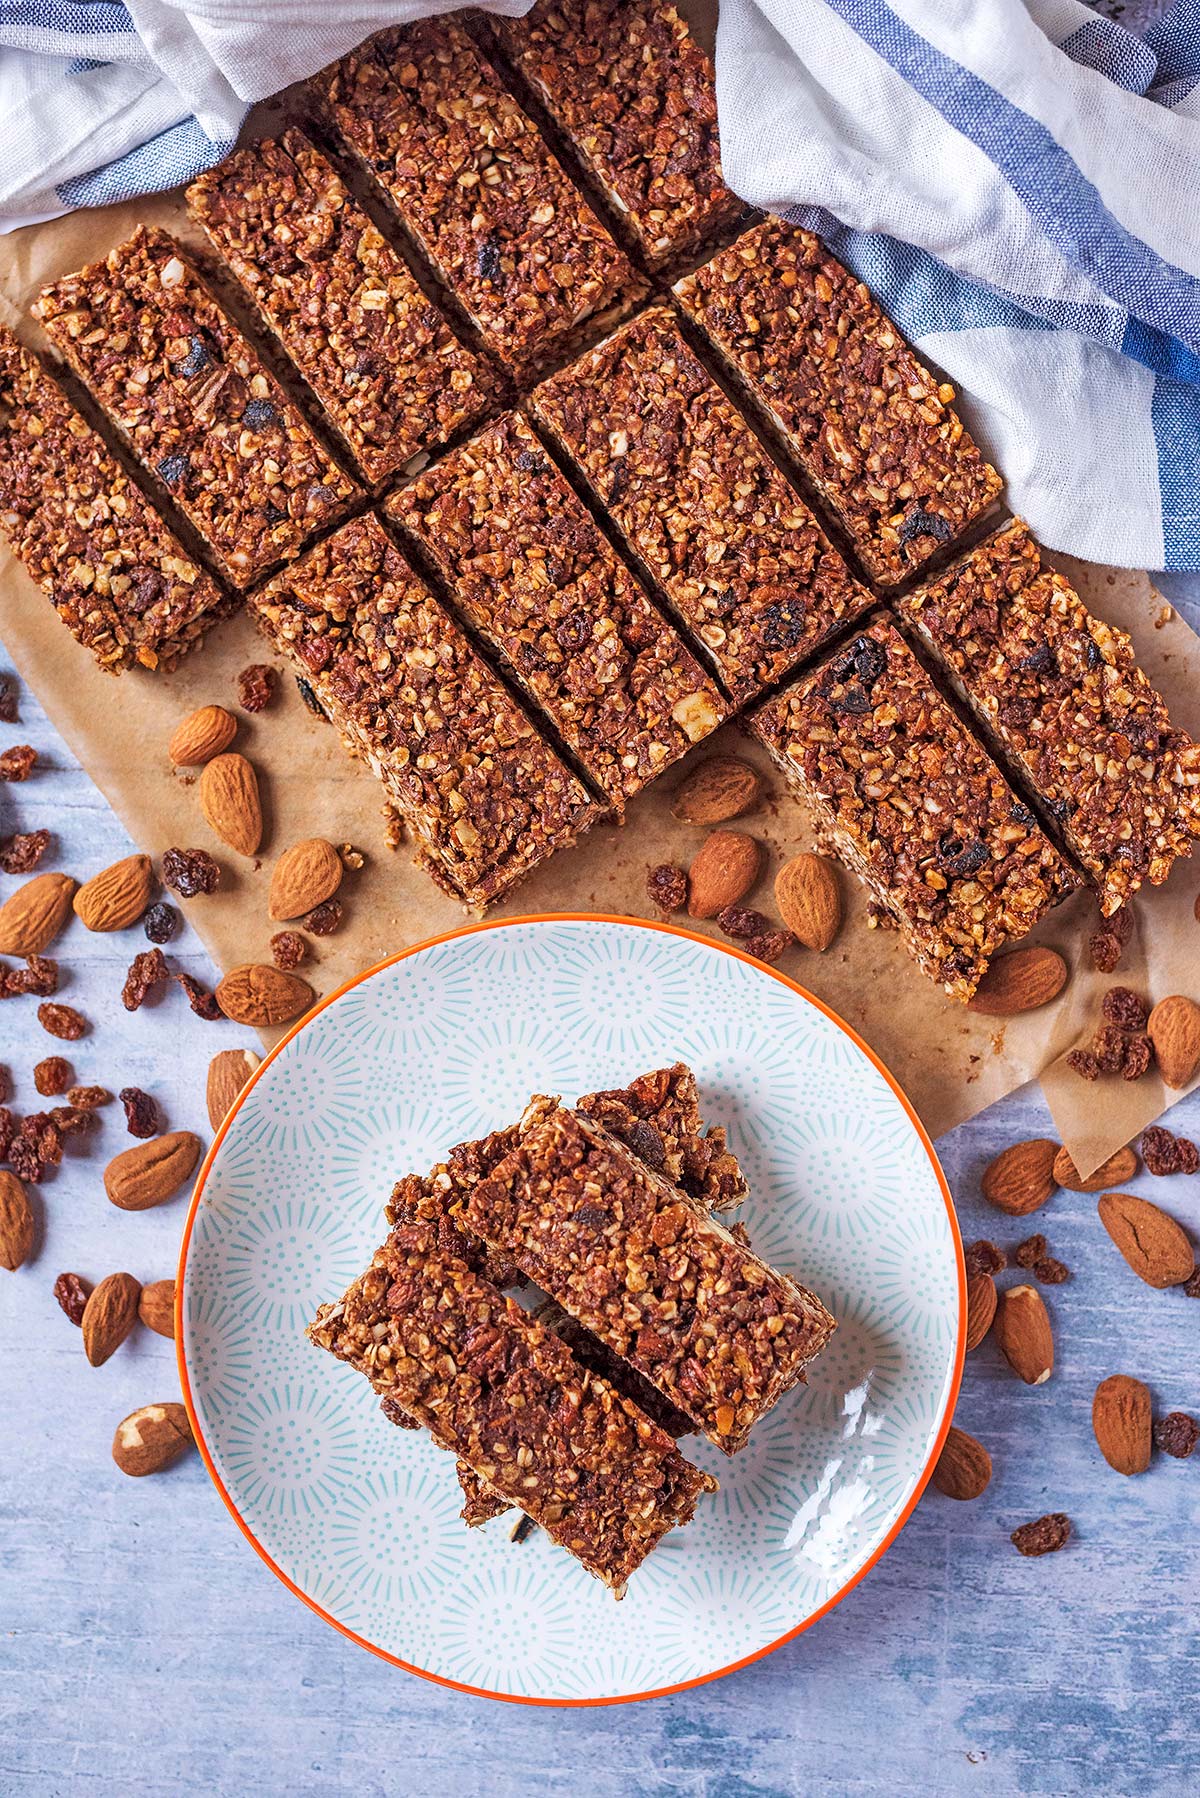 Rows of granola bars next to a plate with more bars on it